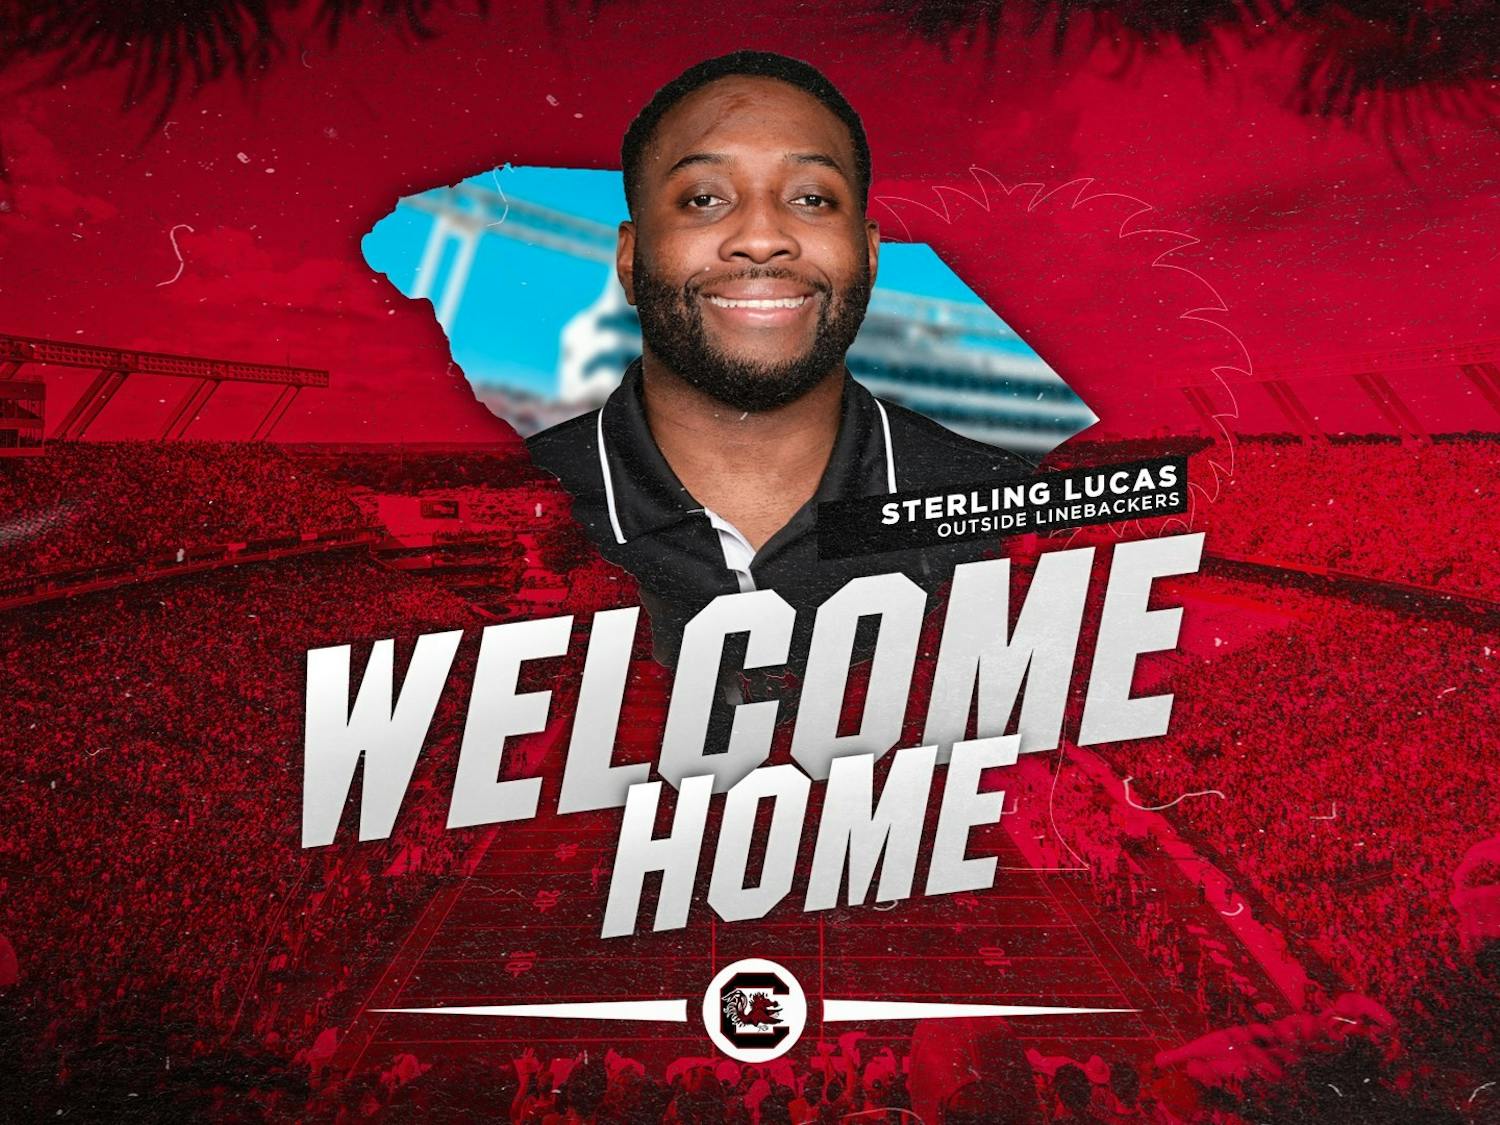 Former Jacksonville Jaguars assistant defensive line coach Sterling Lucas was hired by South Carolina on Jan. 14. Lucas will serve as the outside linebackers coach for the Gamecocks.